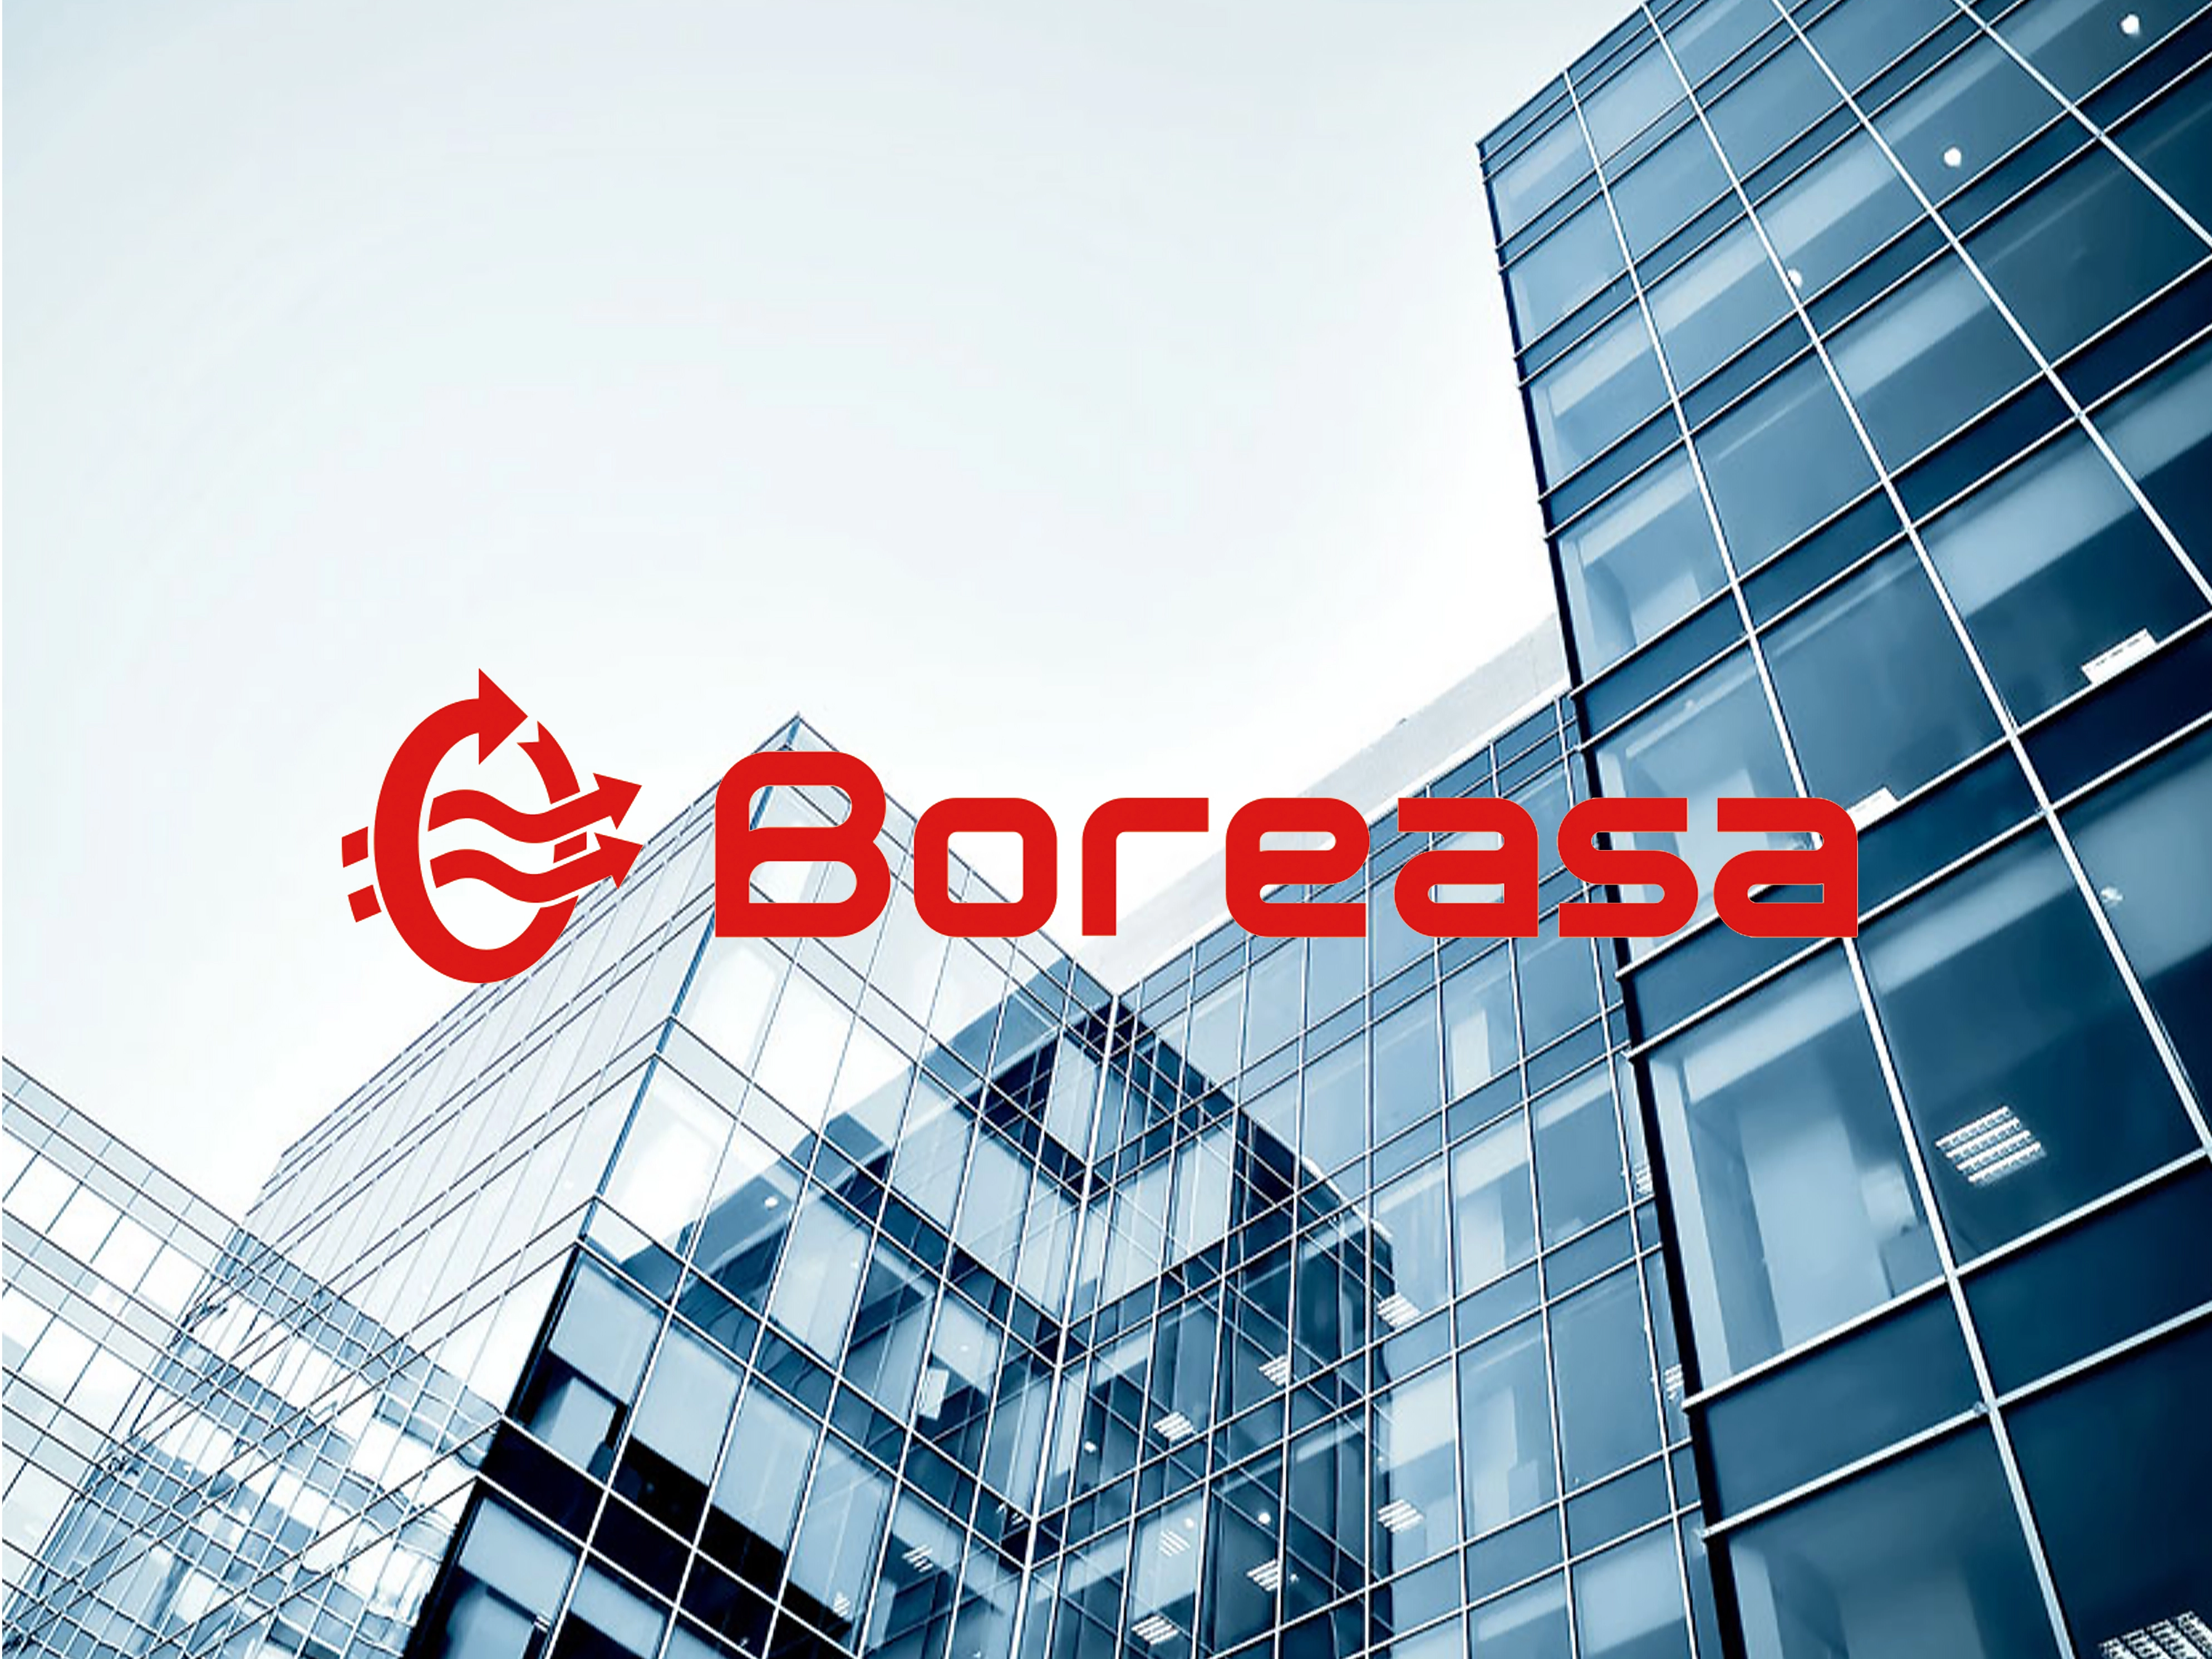 Boreasa’s project won the first prize of the National Invention and Innovation Award in 2023